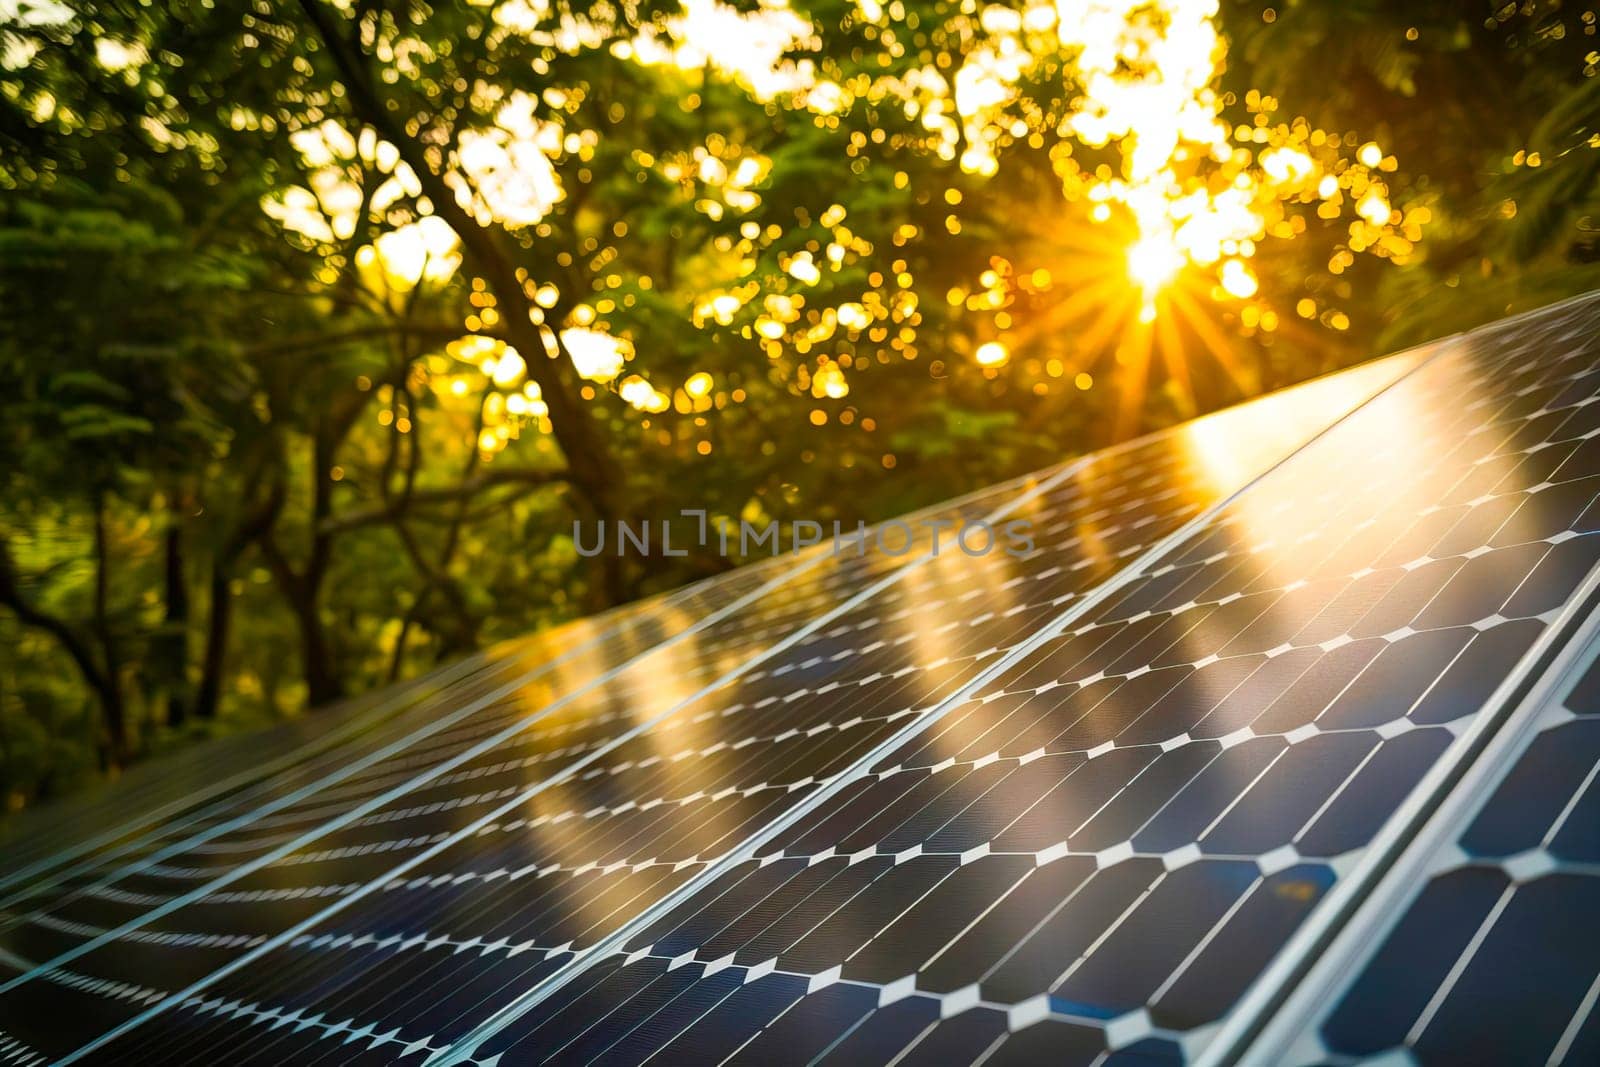 Suns rays filtering through dense forest to illuminate solar panel in close-up shot.